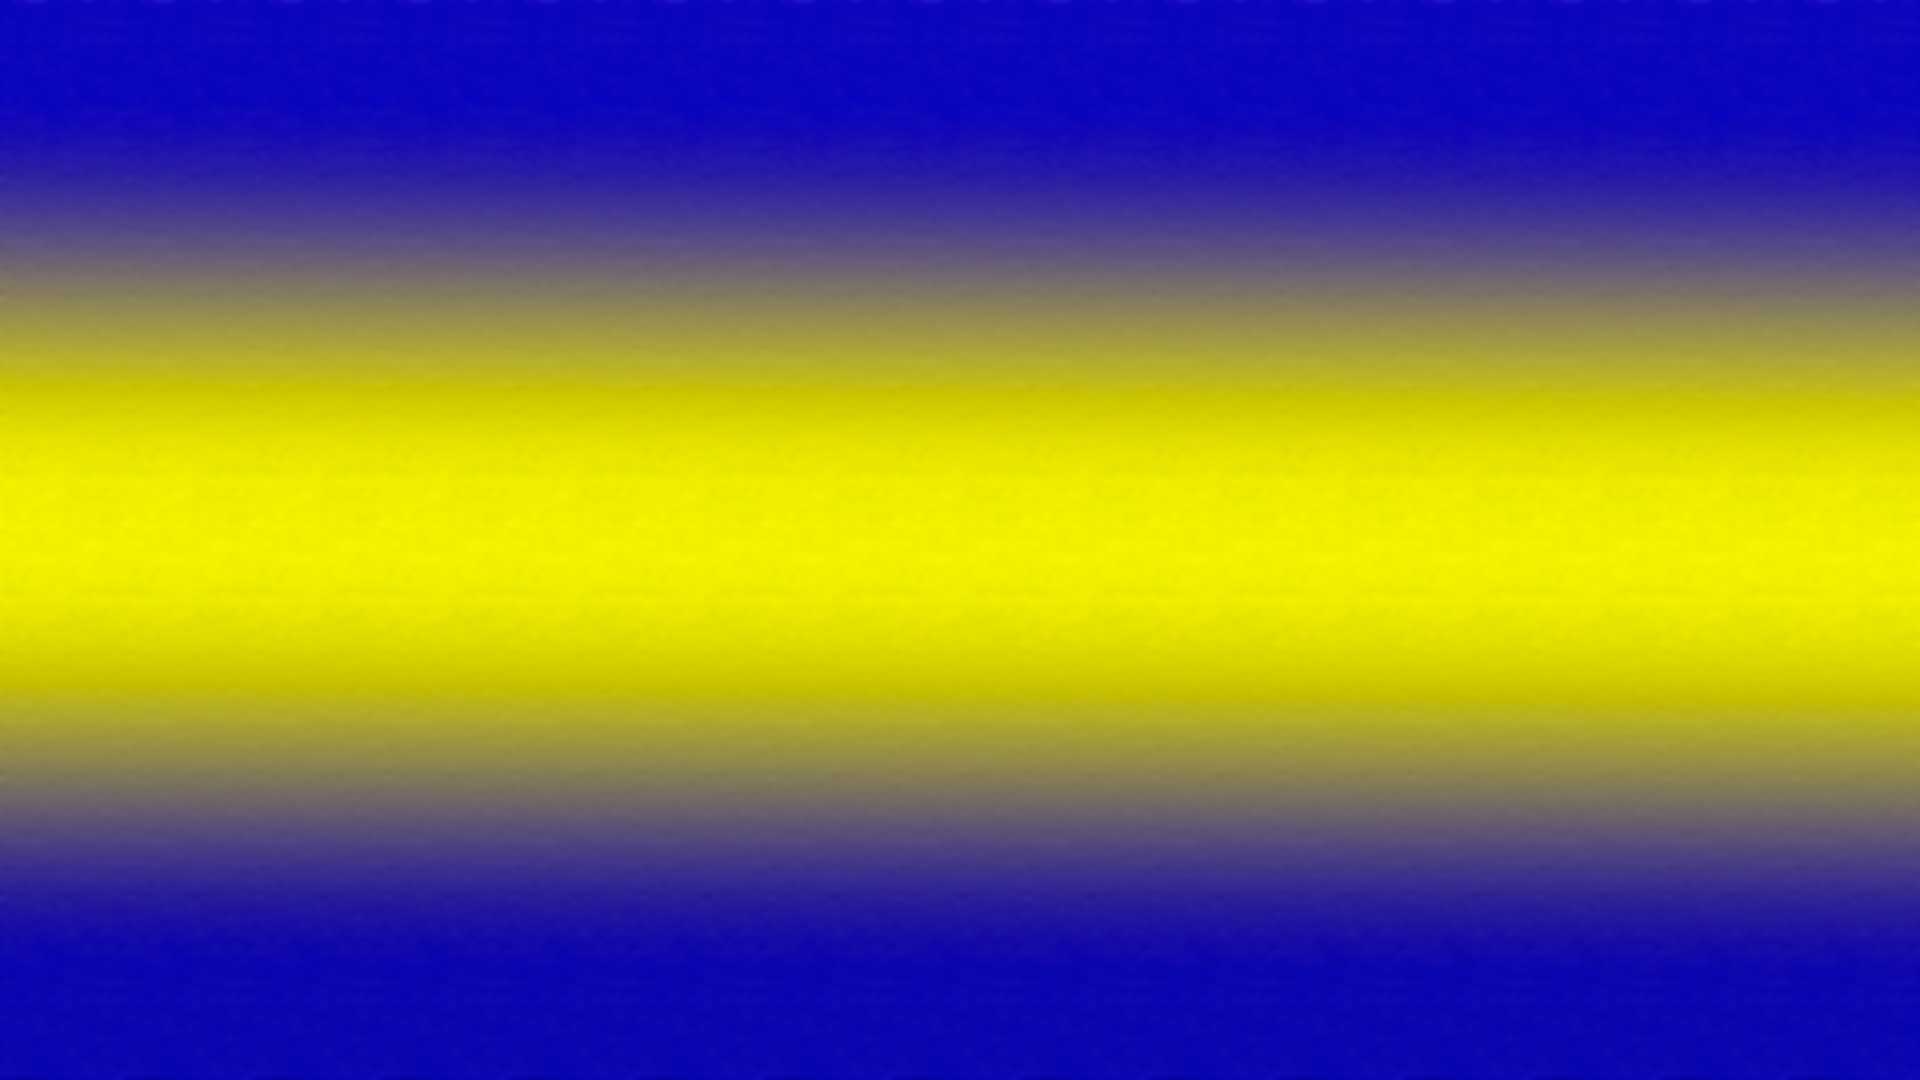 Light Blue And Yellow Wallpaper - Blue And Yellow Screen - HD Wallpaper 